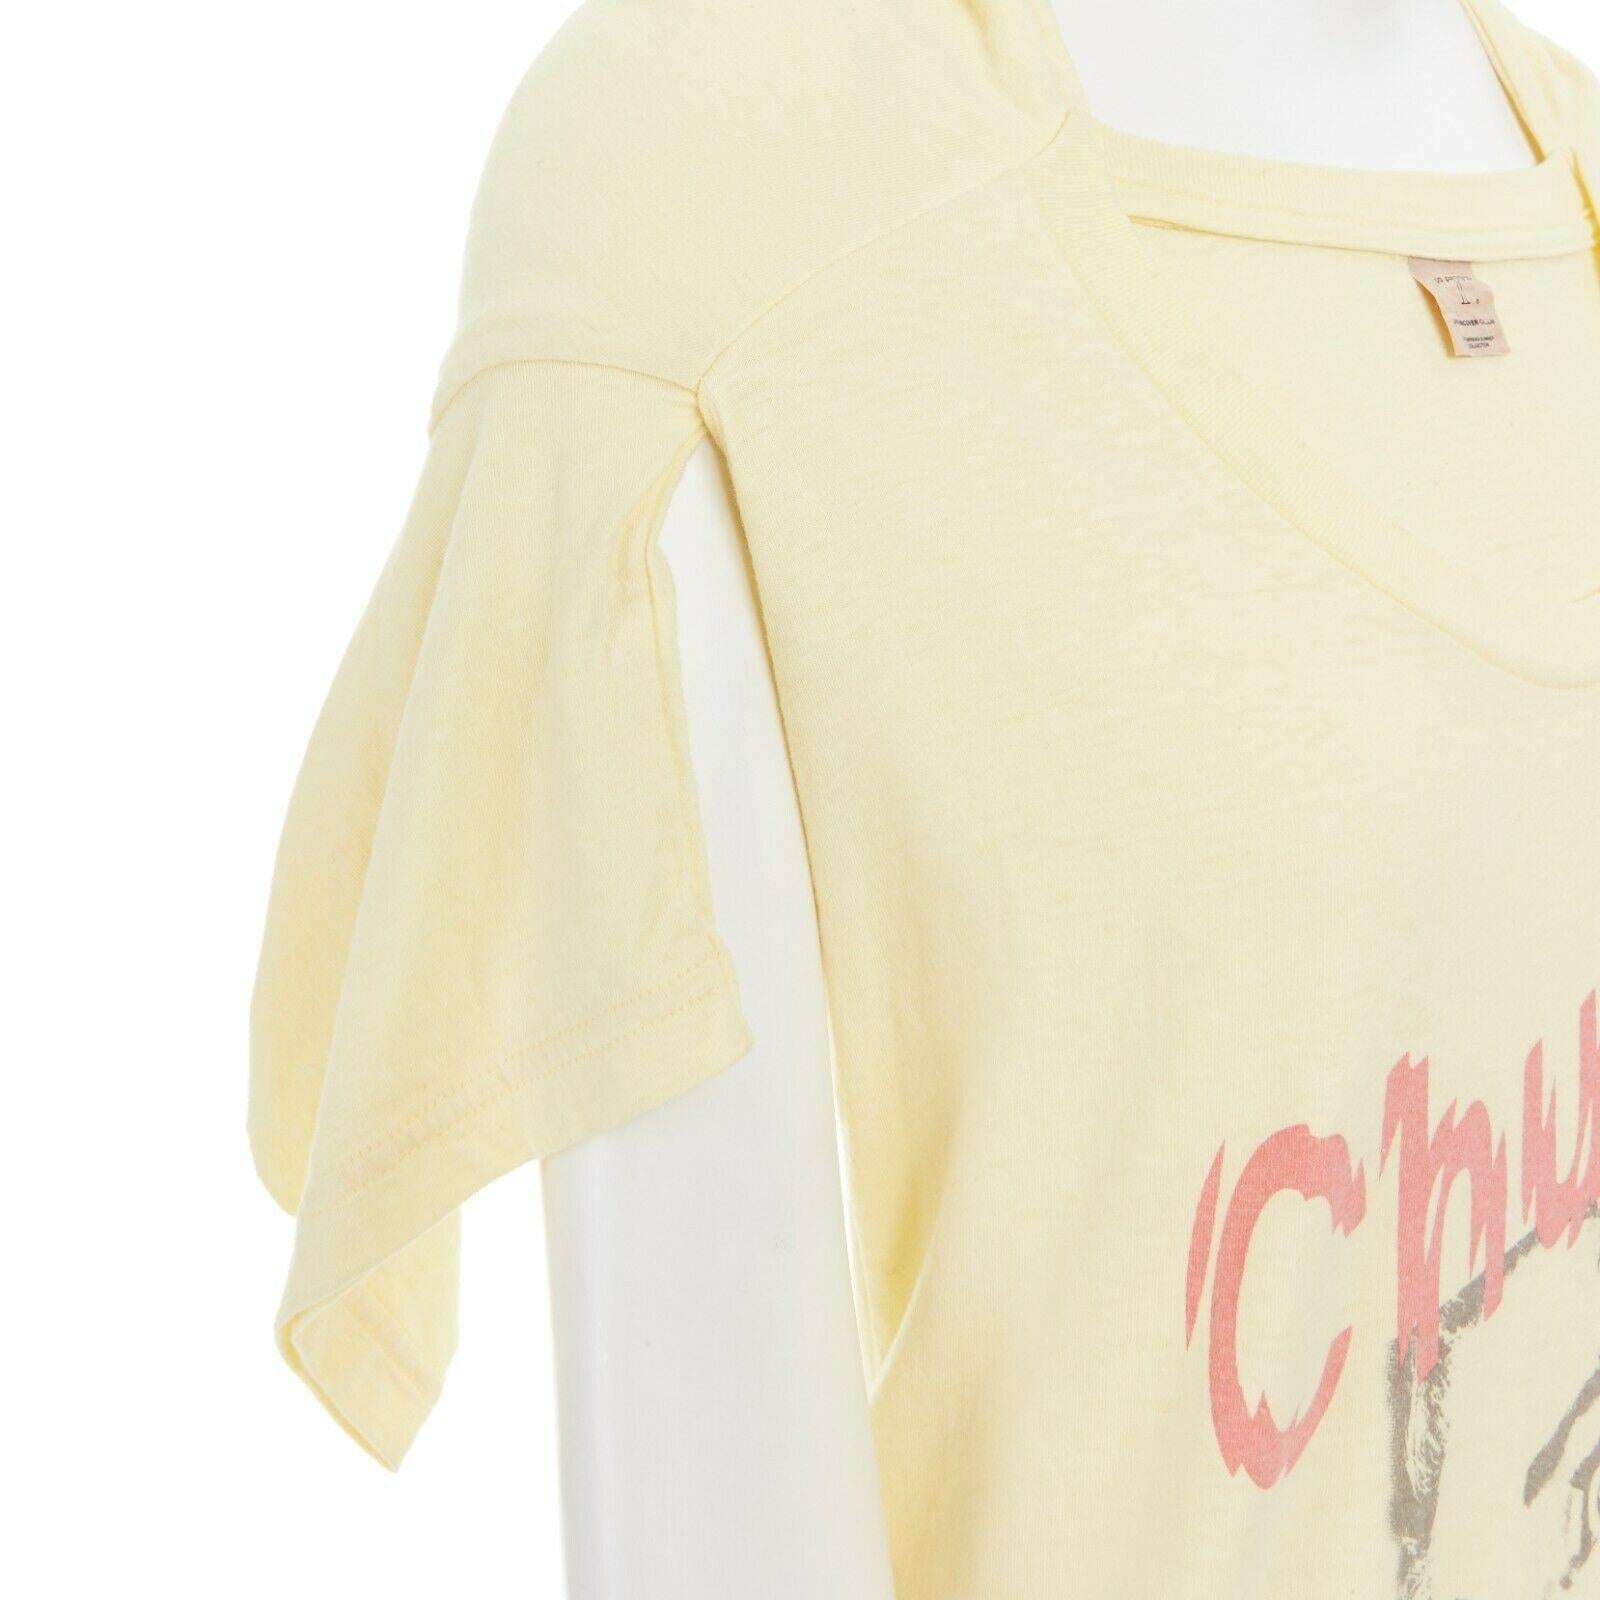 new UNDERCOVER Chuut! print yellow cotton deconstructed  t-shirt tunic top JP2 M 1